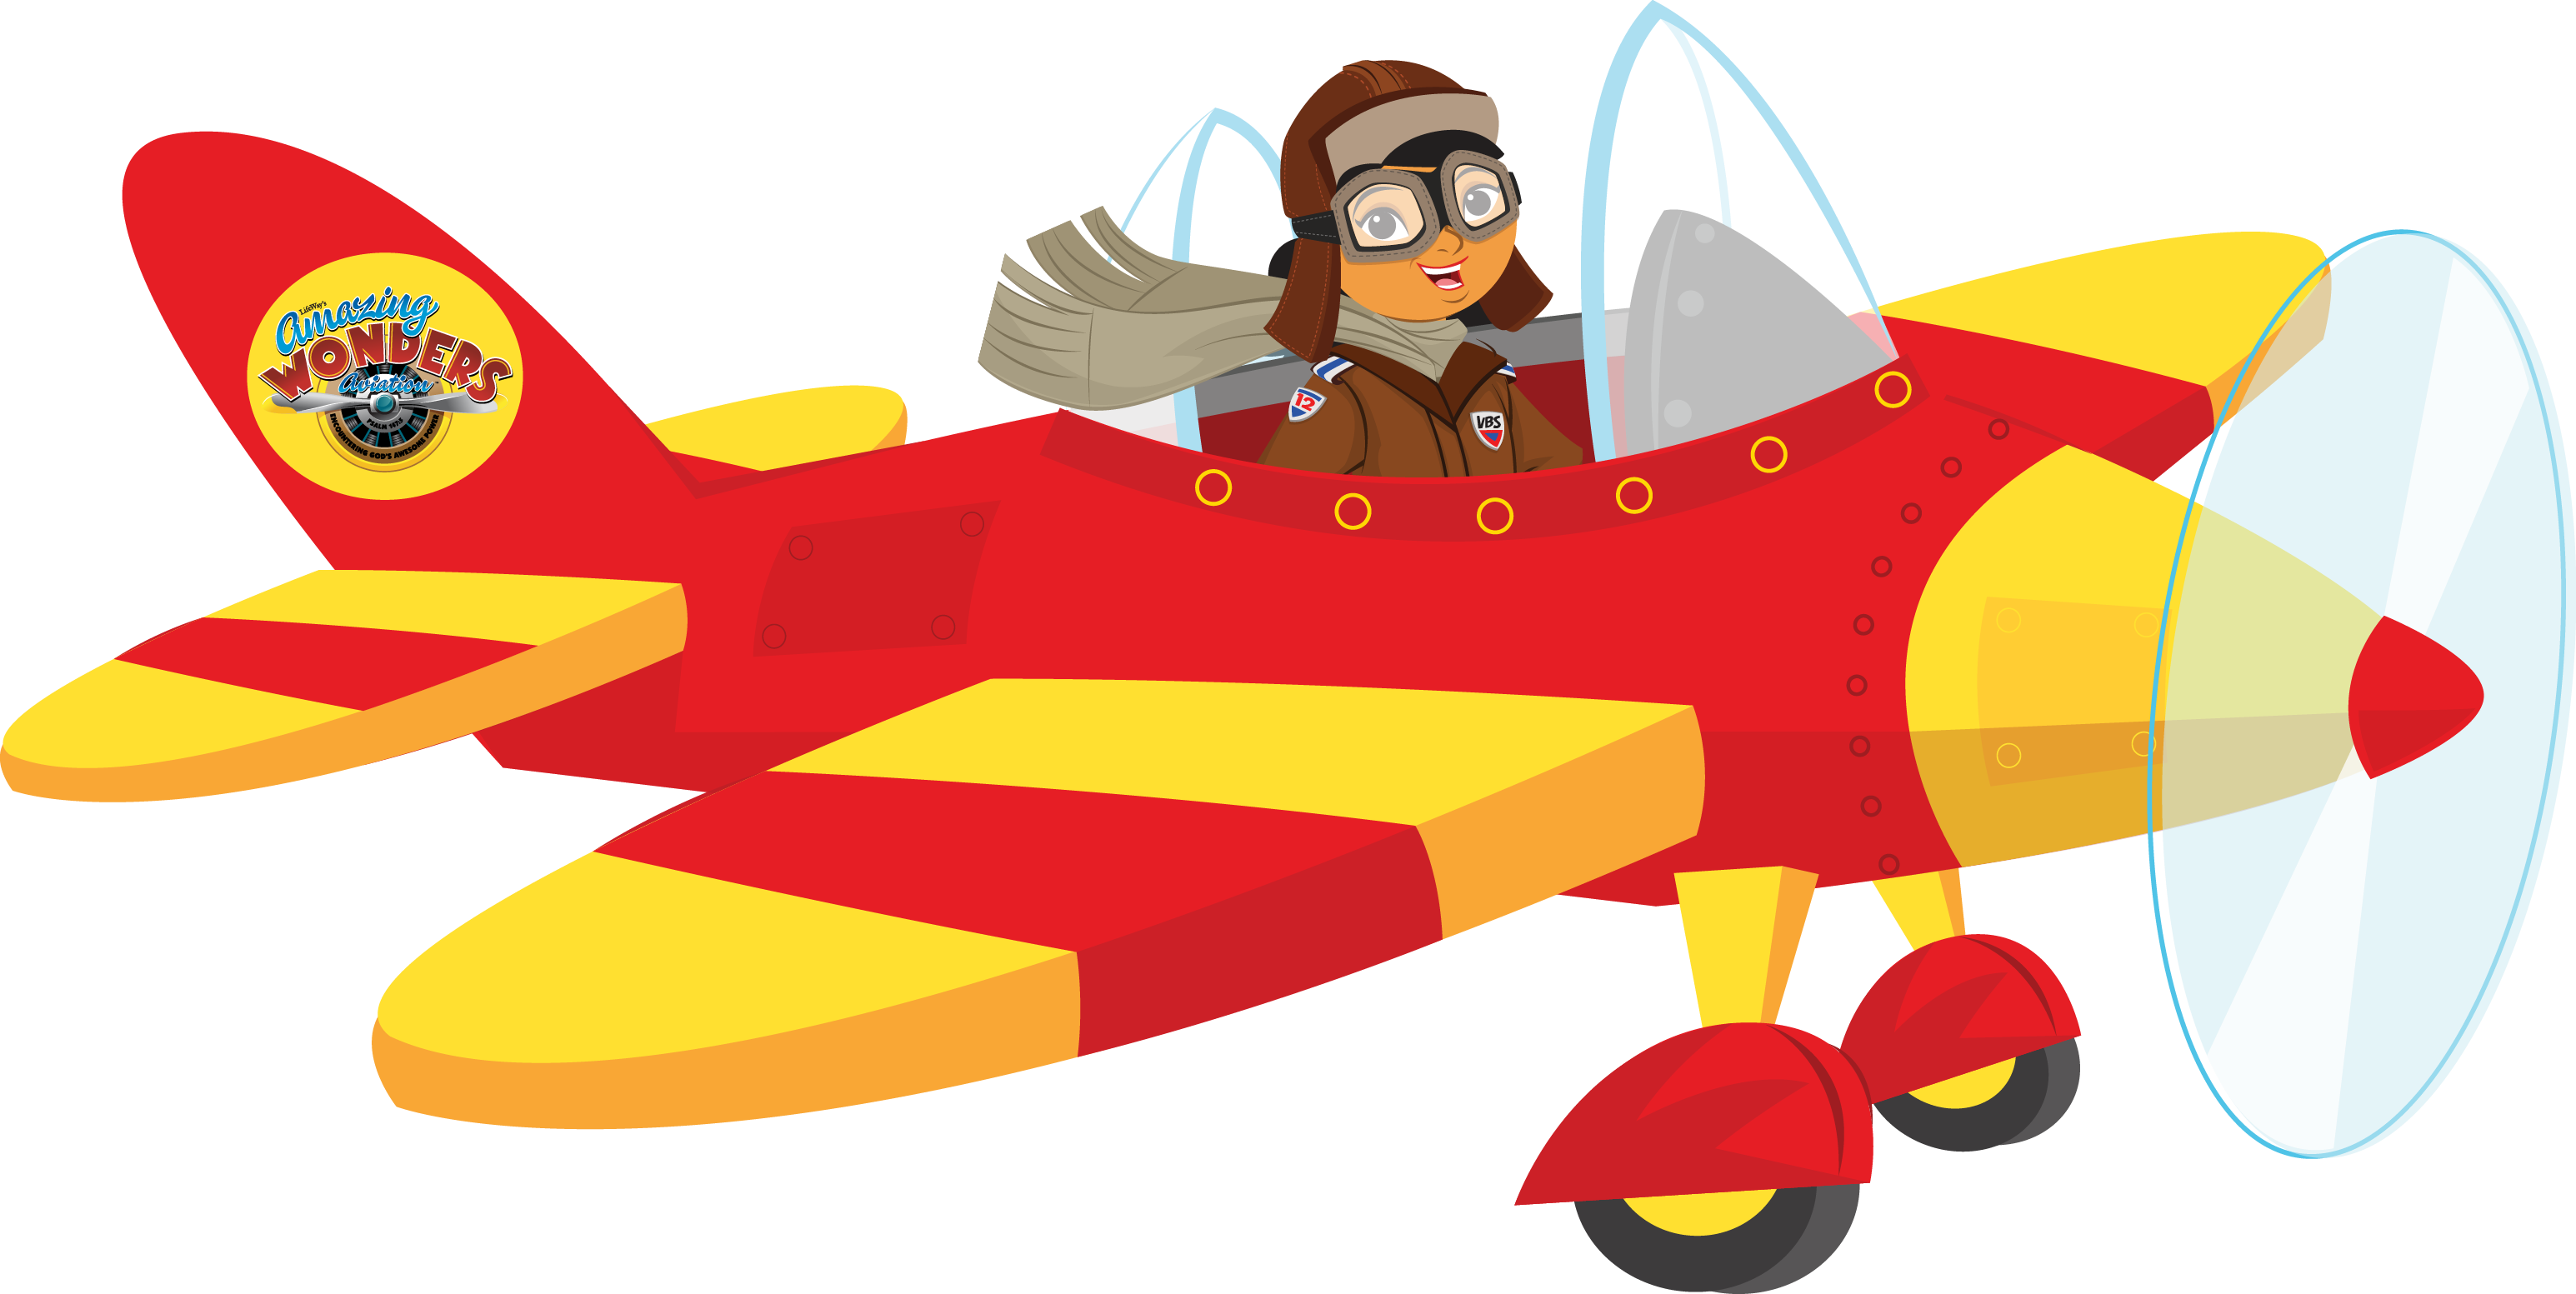 Cute airplane clipart free clipart images clipartix 2